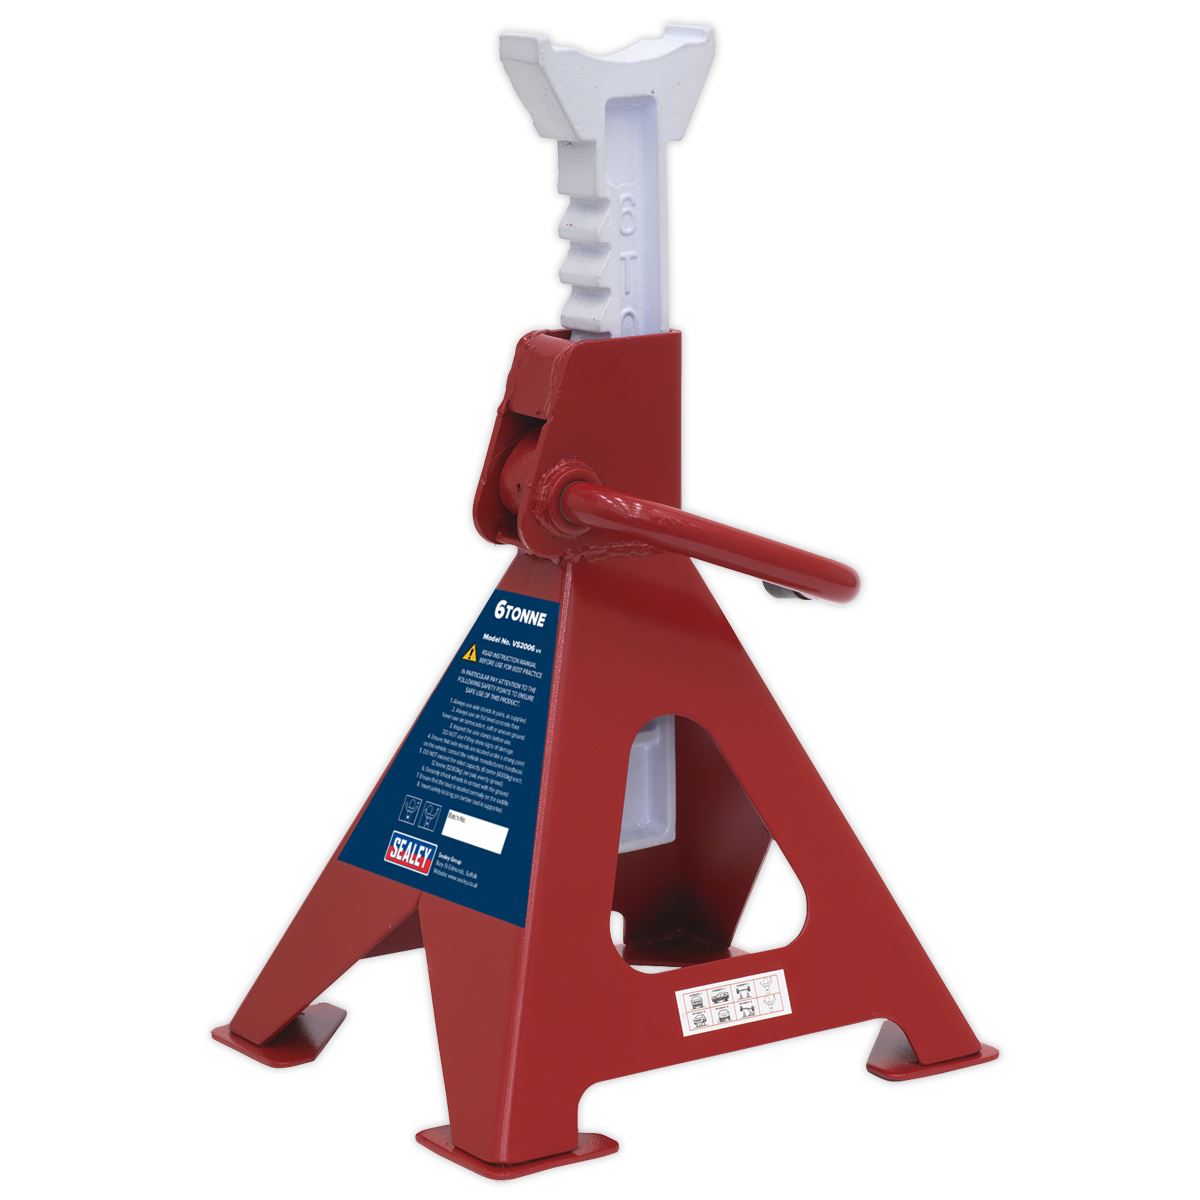 Sealey Ratchet Type Axle Stands (Pair) 6 Tonne Capacity per Stand